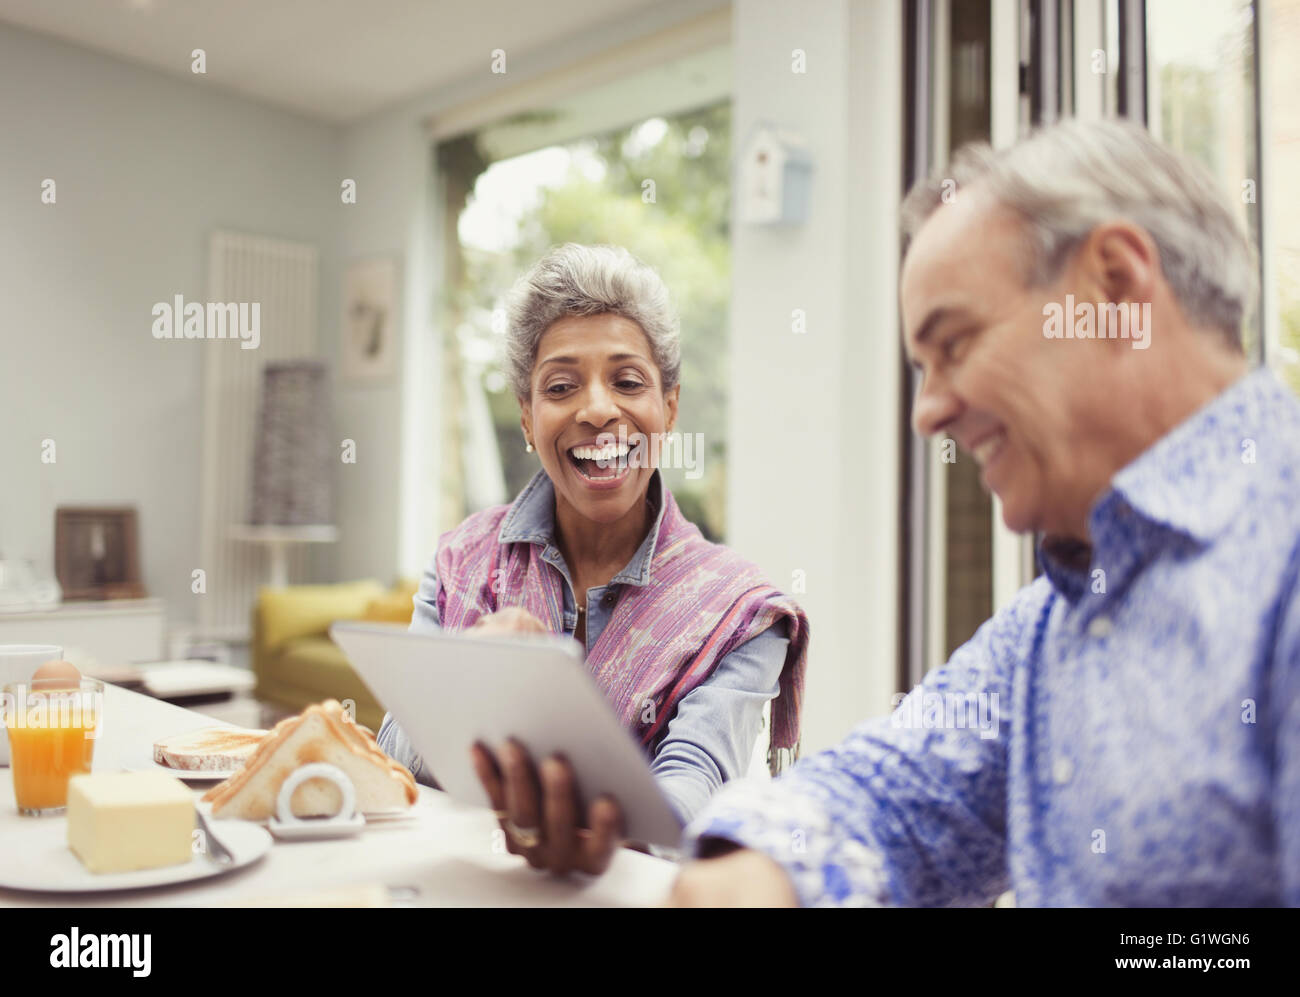 Mature couple laughing and using digital tablet at breakfast table Banque D'Images